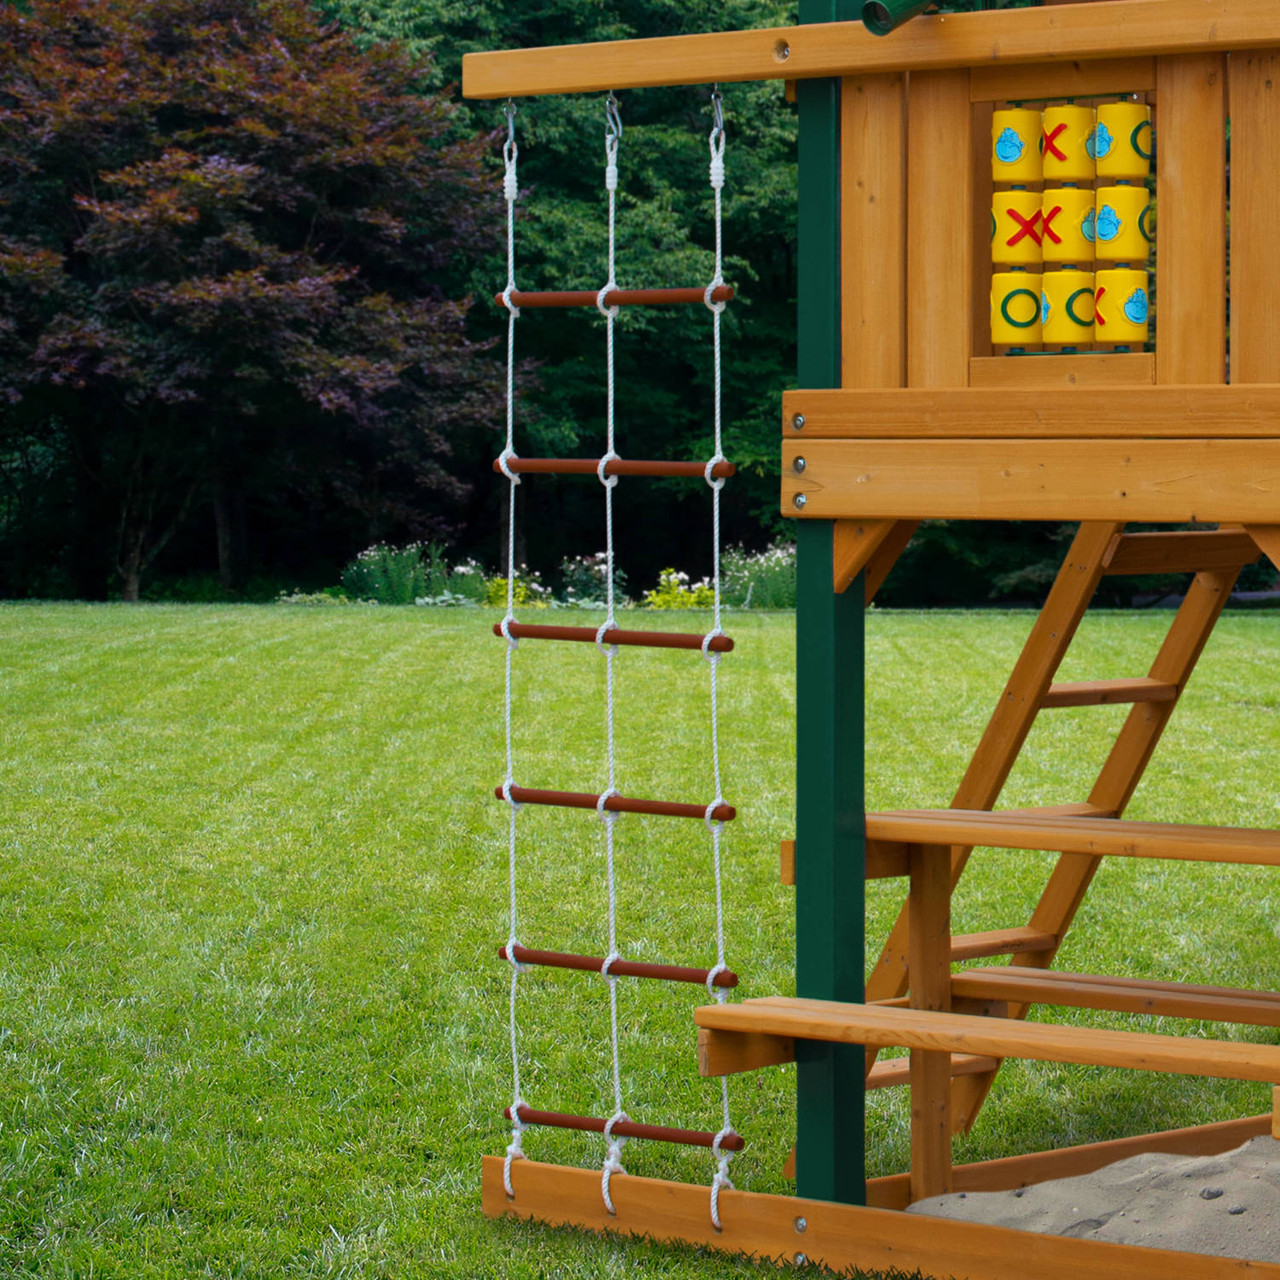 Sturdy Rope Climbing Ladder Wooden Playhouse Ladder Toy w/ Hook